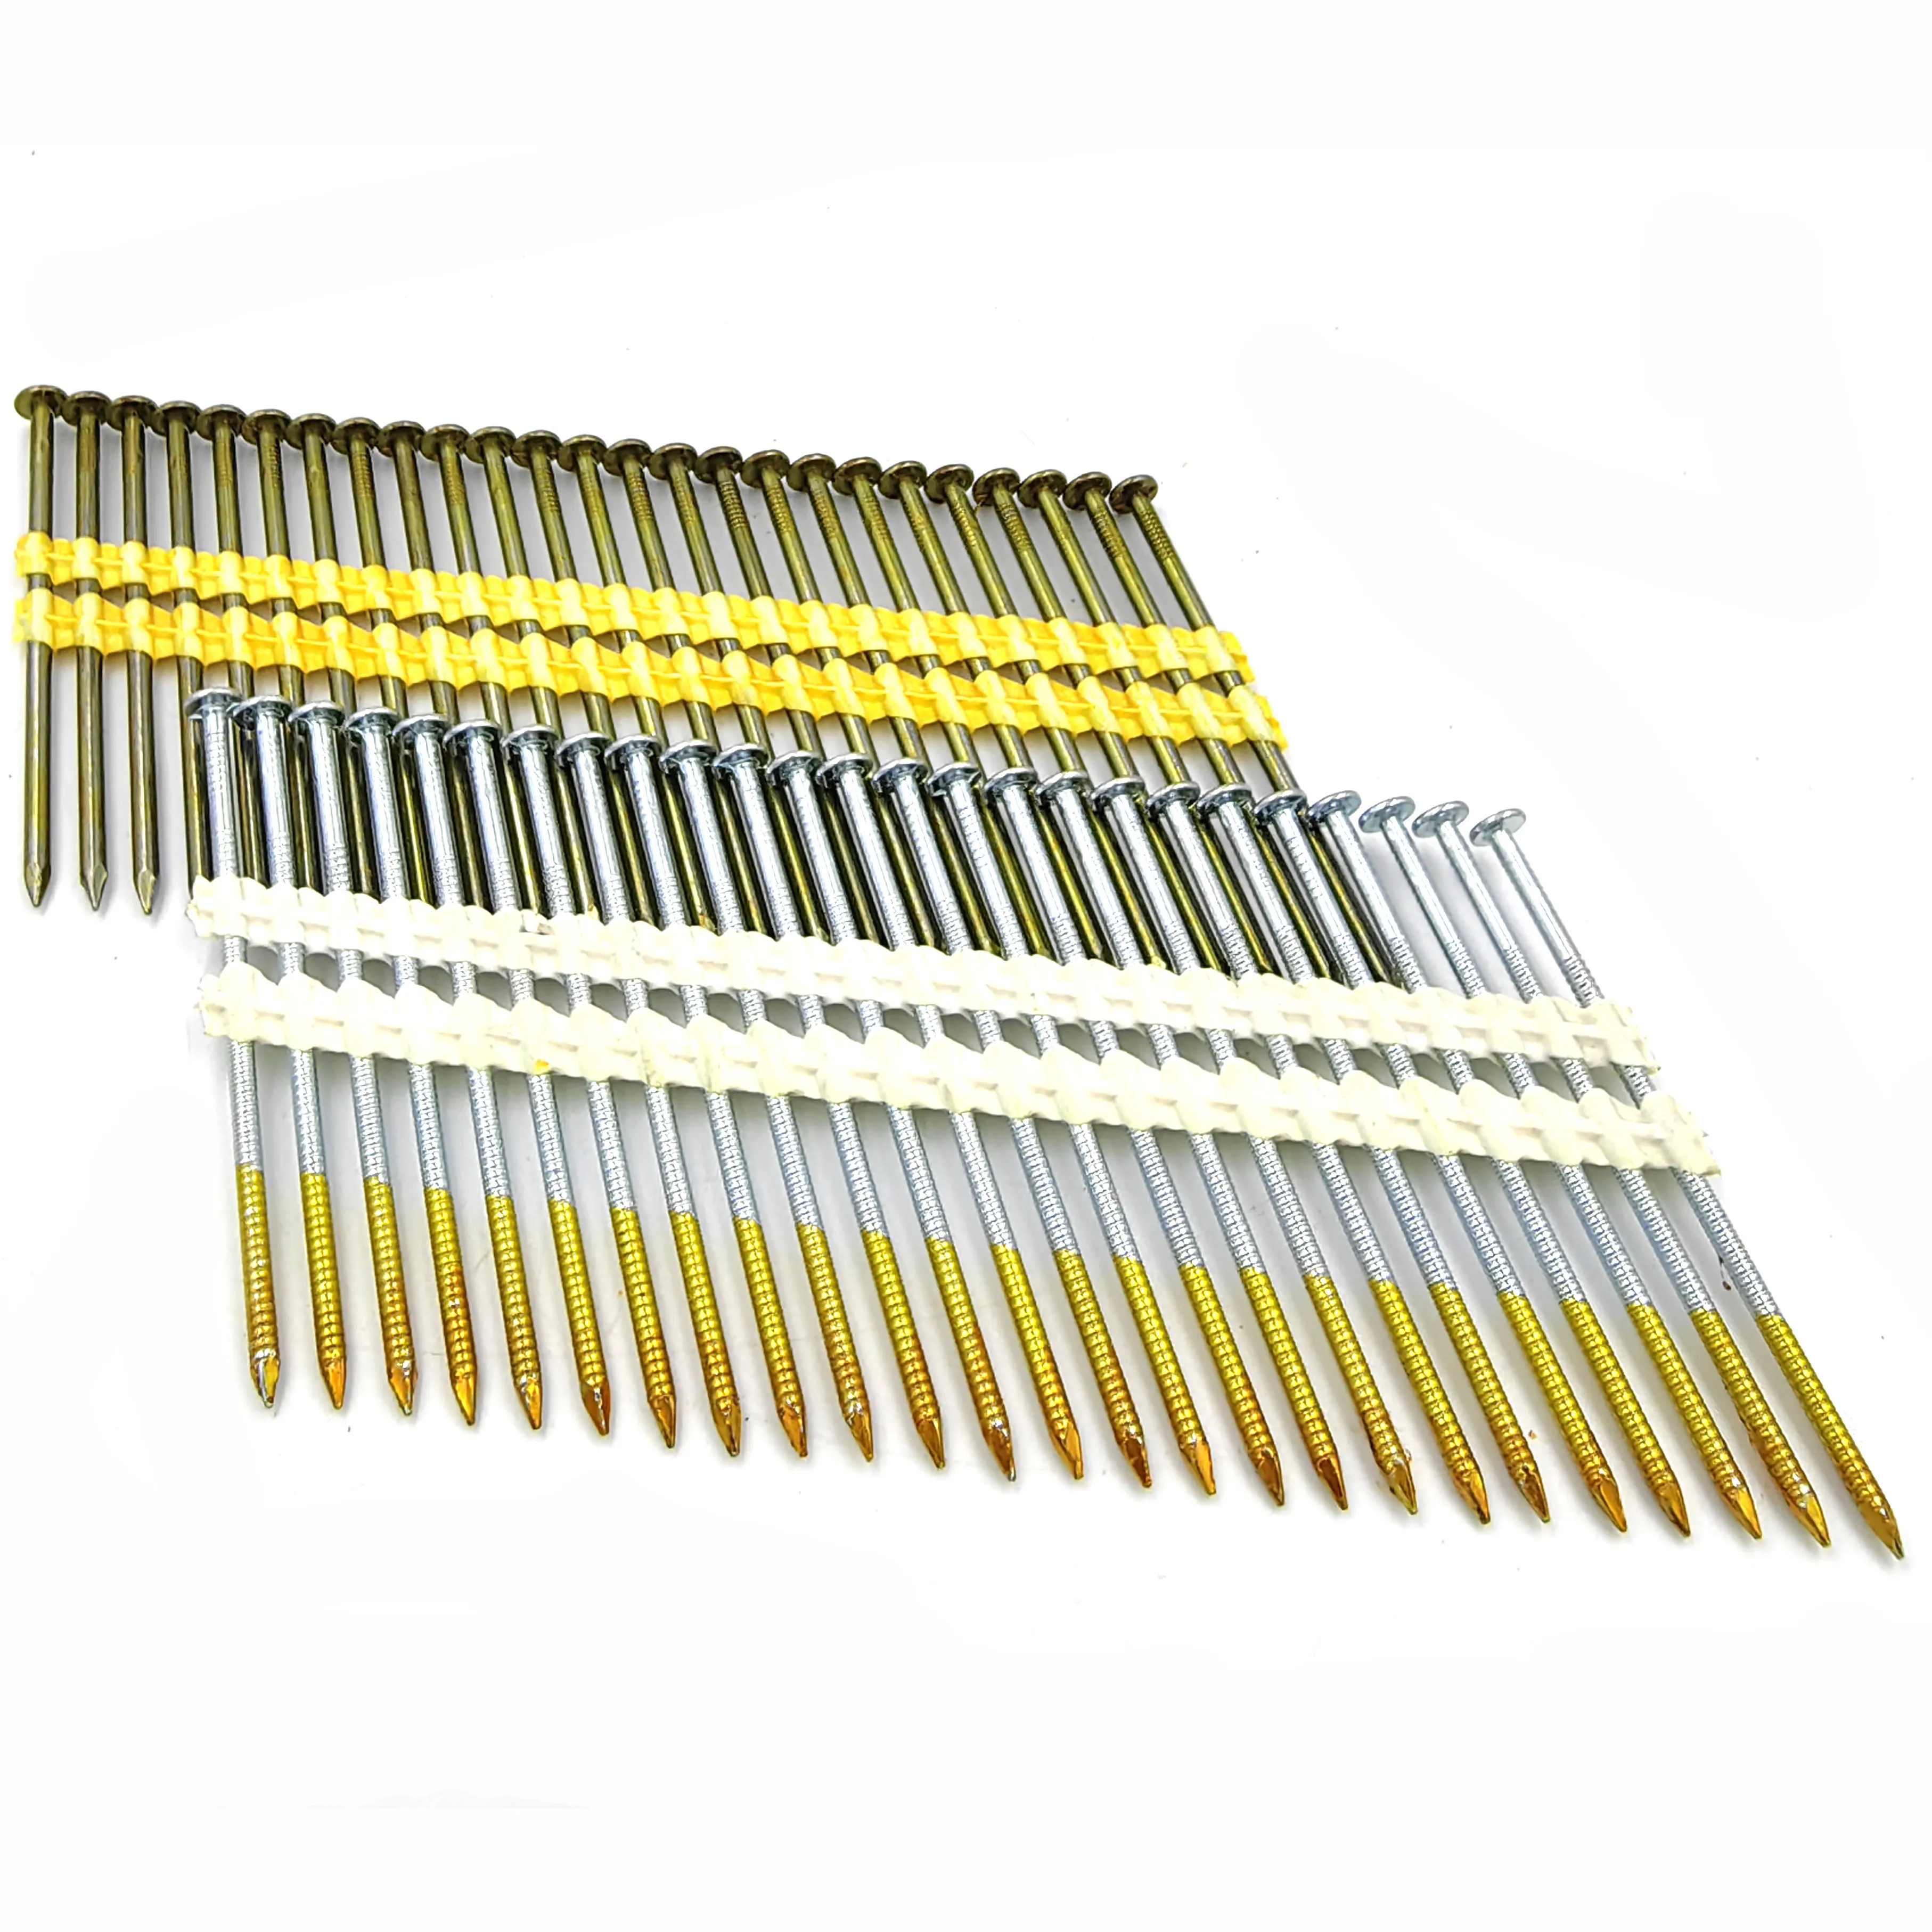 21 Degree Plastic Strip Nails Plastic Collated Strip Nails Framing Nails for Wood